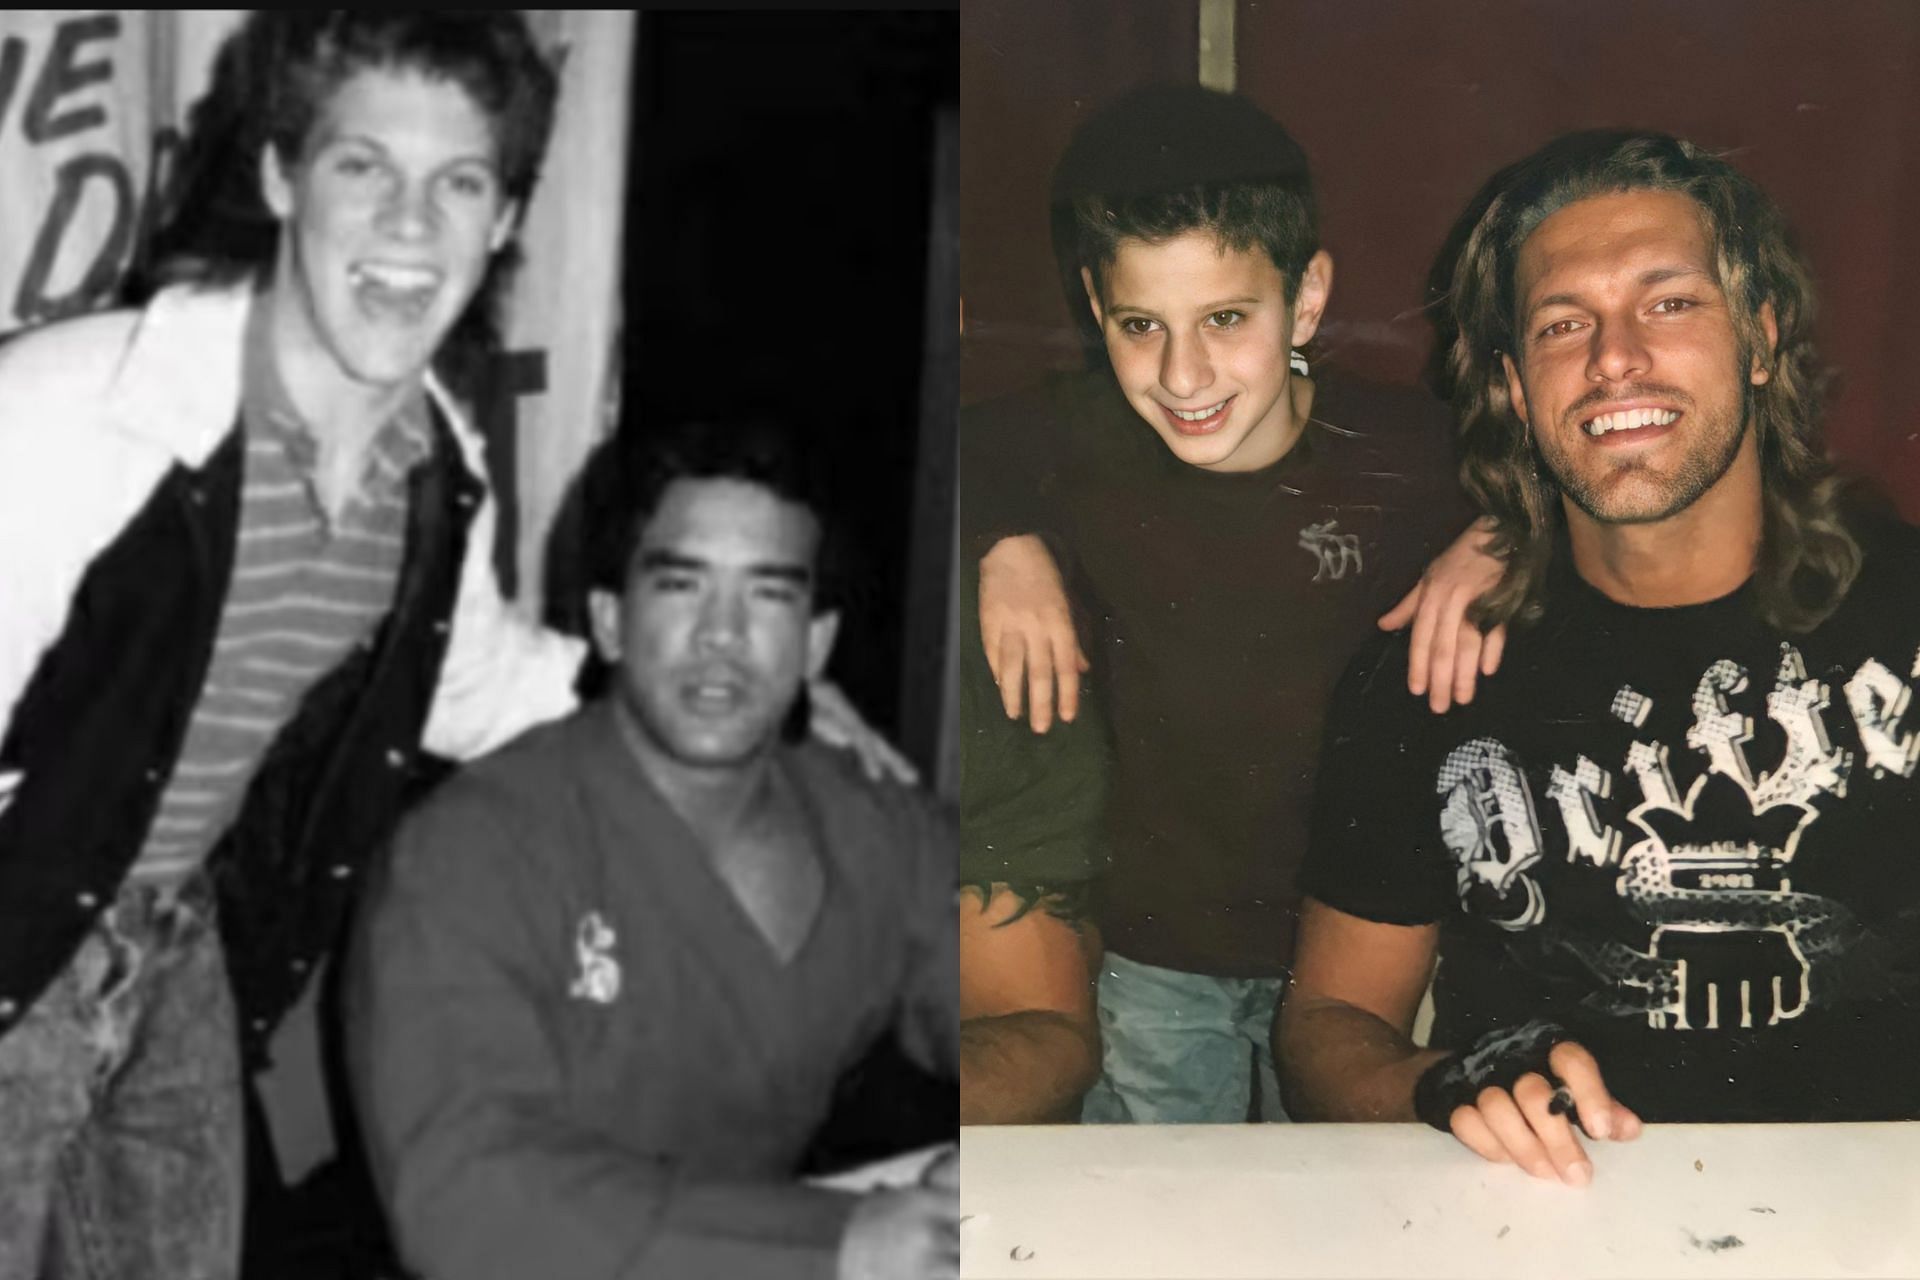 Just pictures of AEW fans who were wrestling fans while growing up